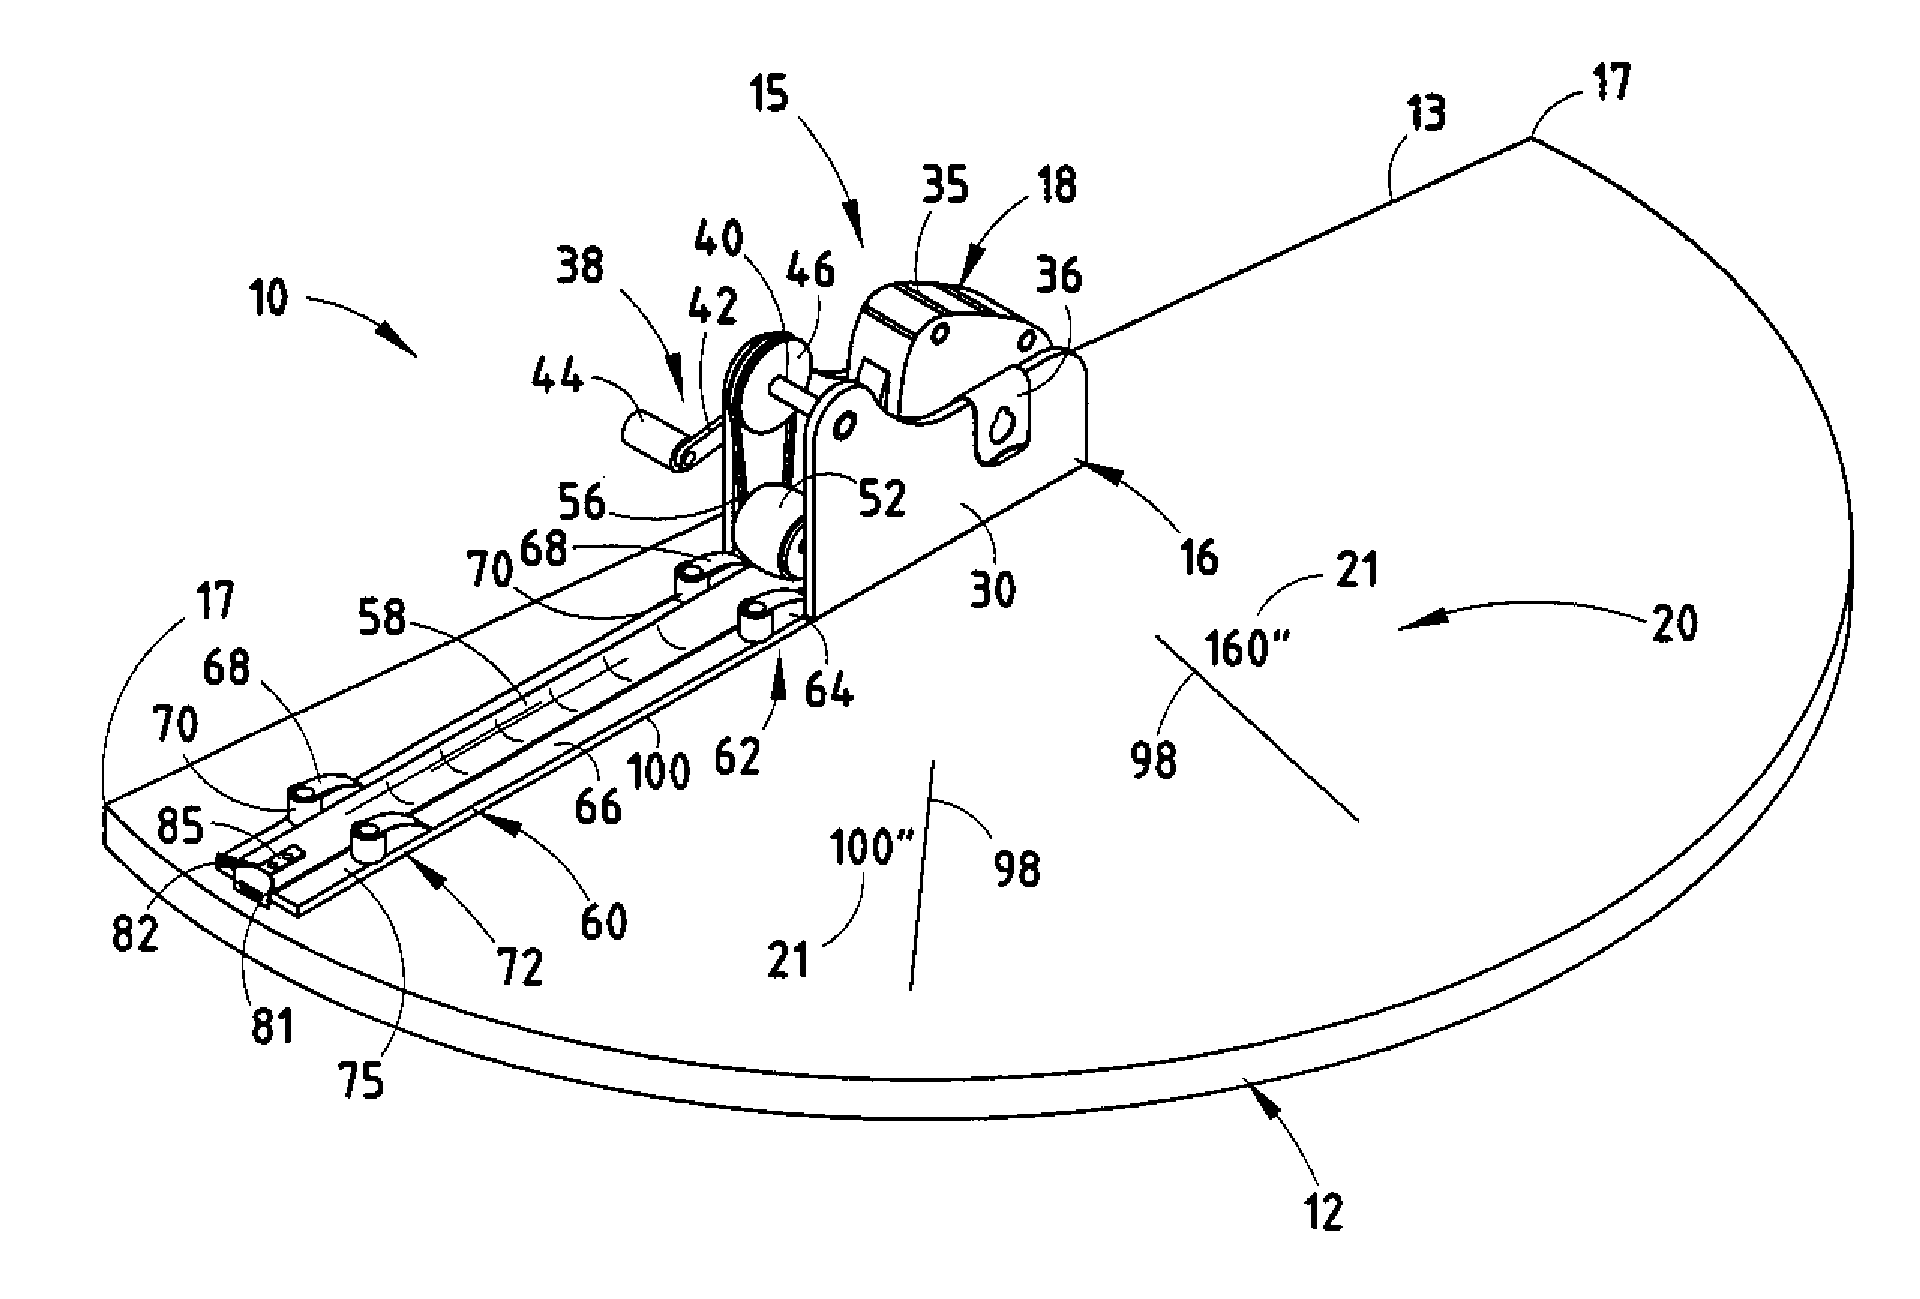 Measuring and layout device